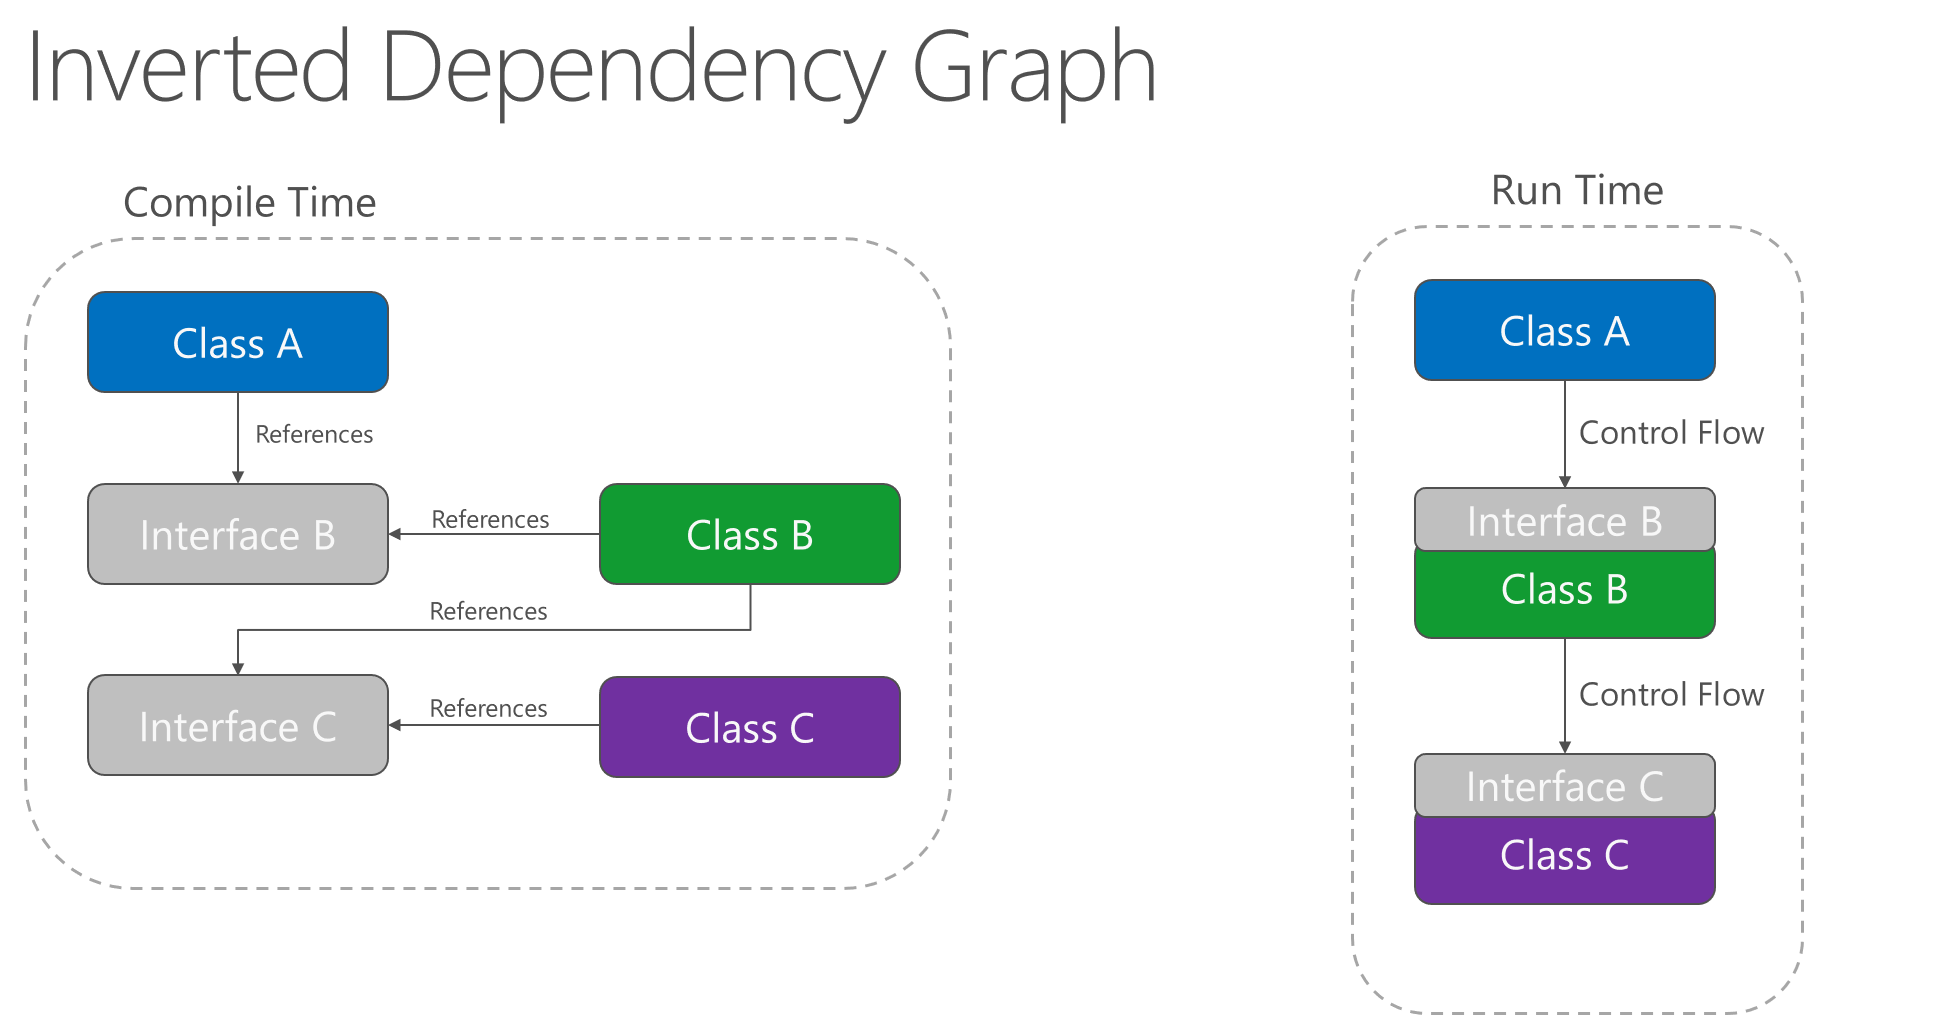 Inverted dependency graph